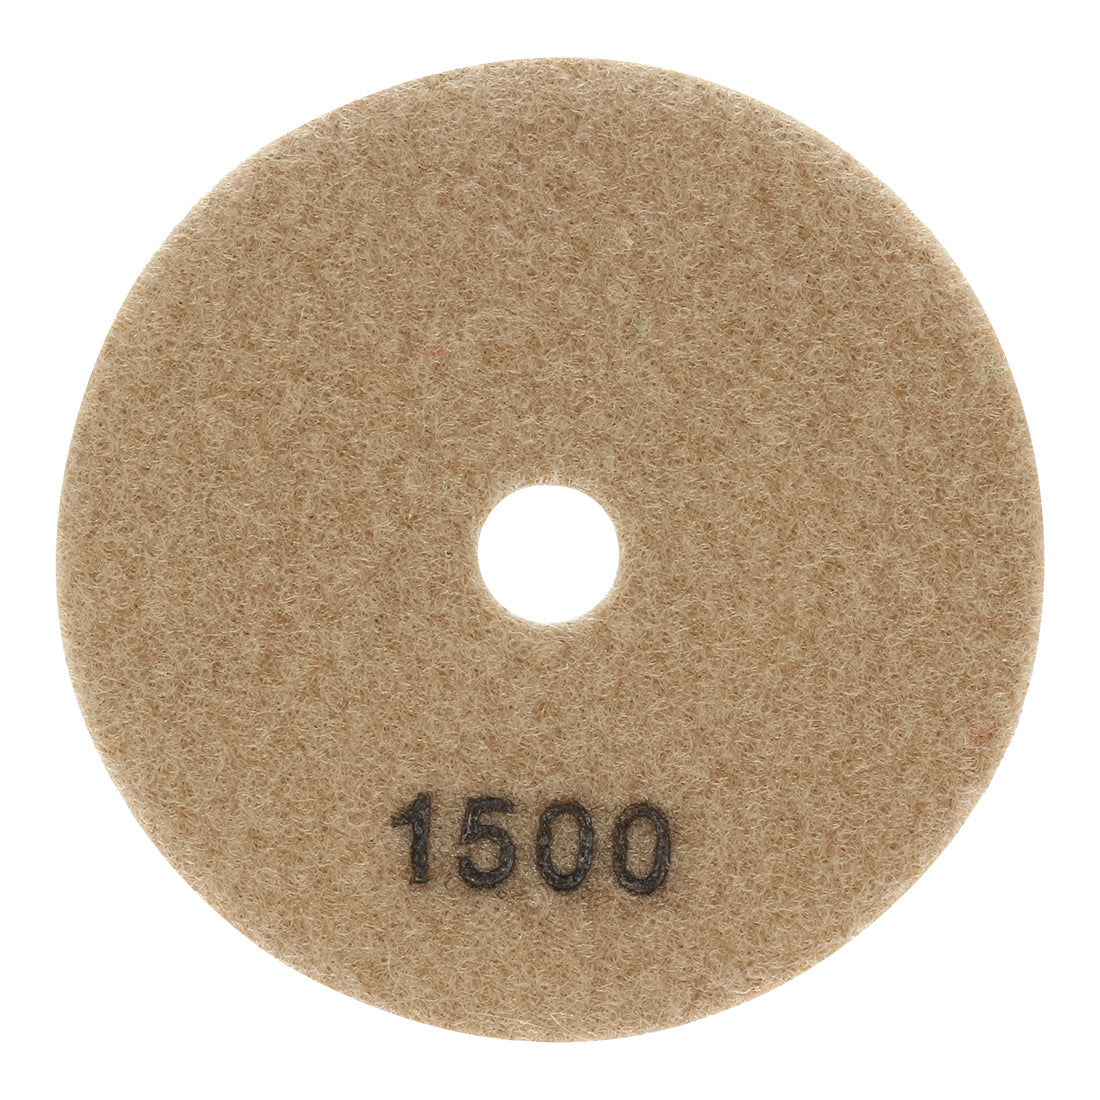 uxcell Uxcell 4" Diamond Wet Polishing Pad Grit 1500 10pcs for Granite Concrete Marble